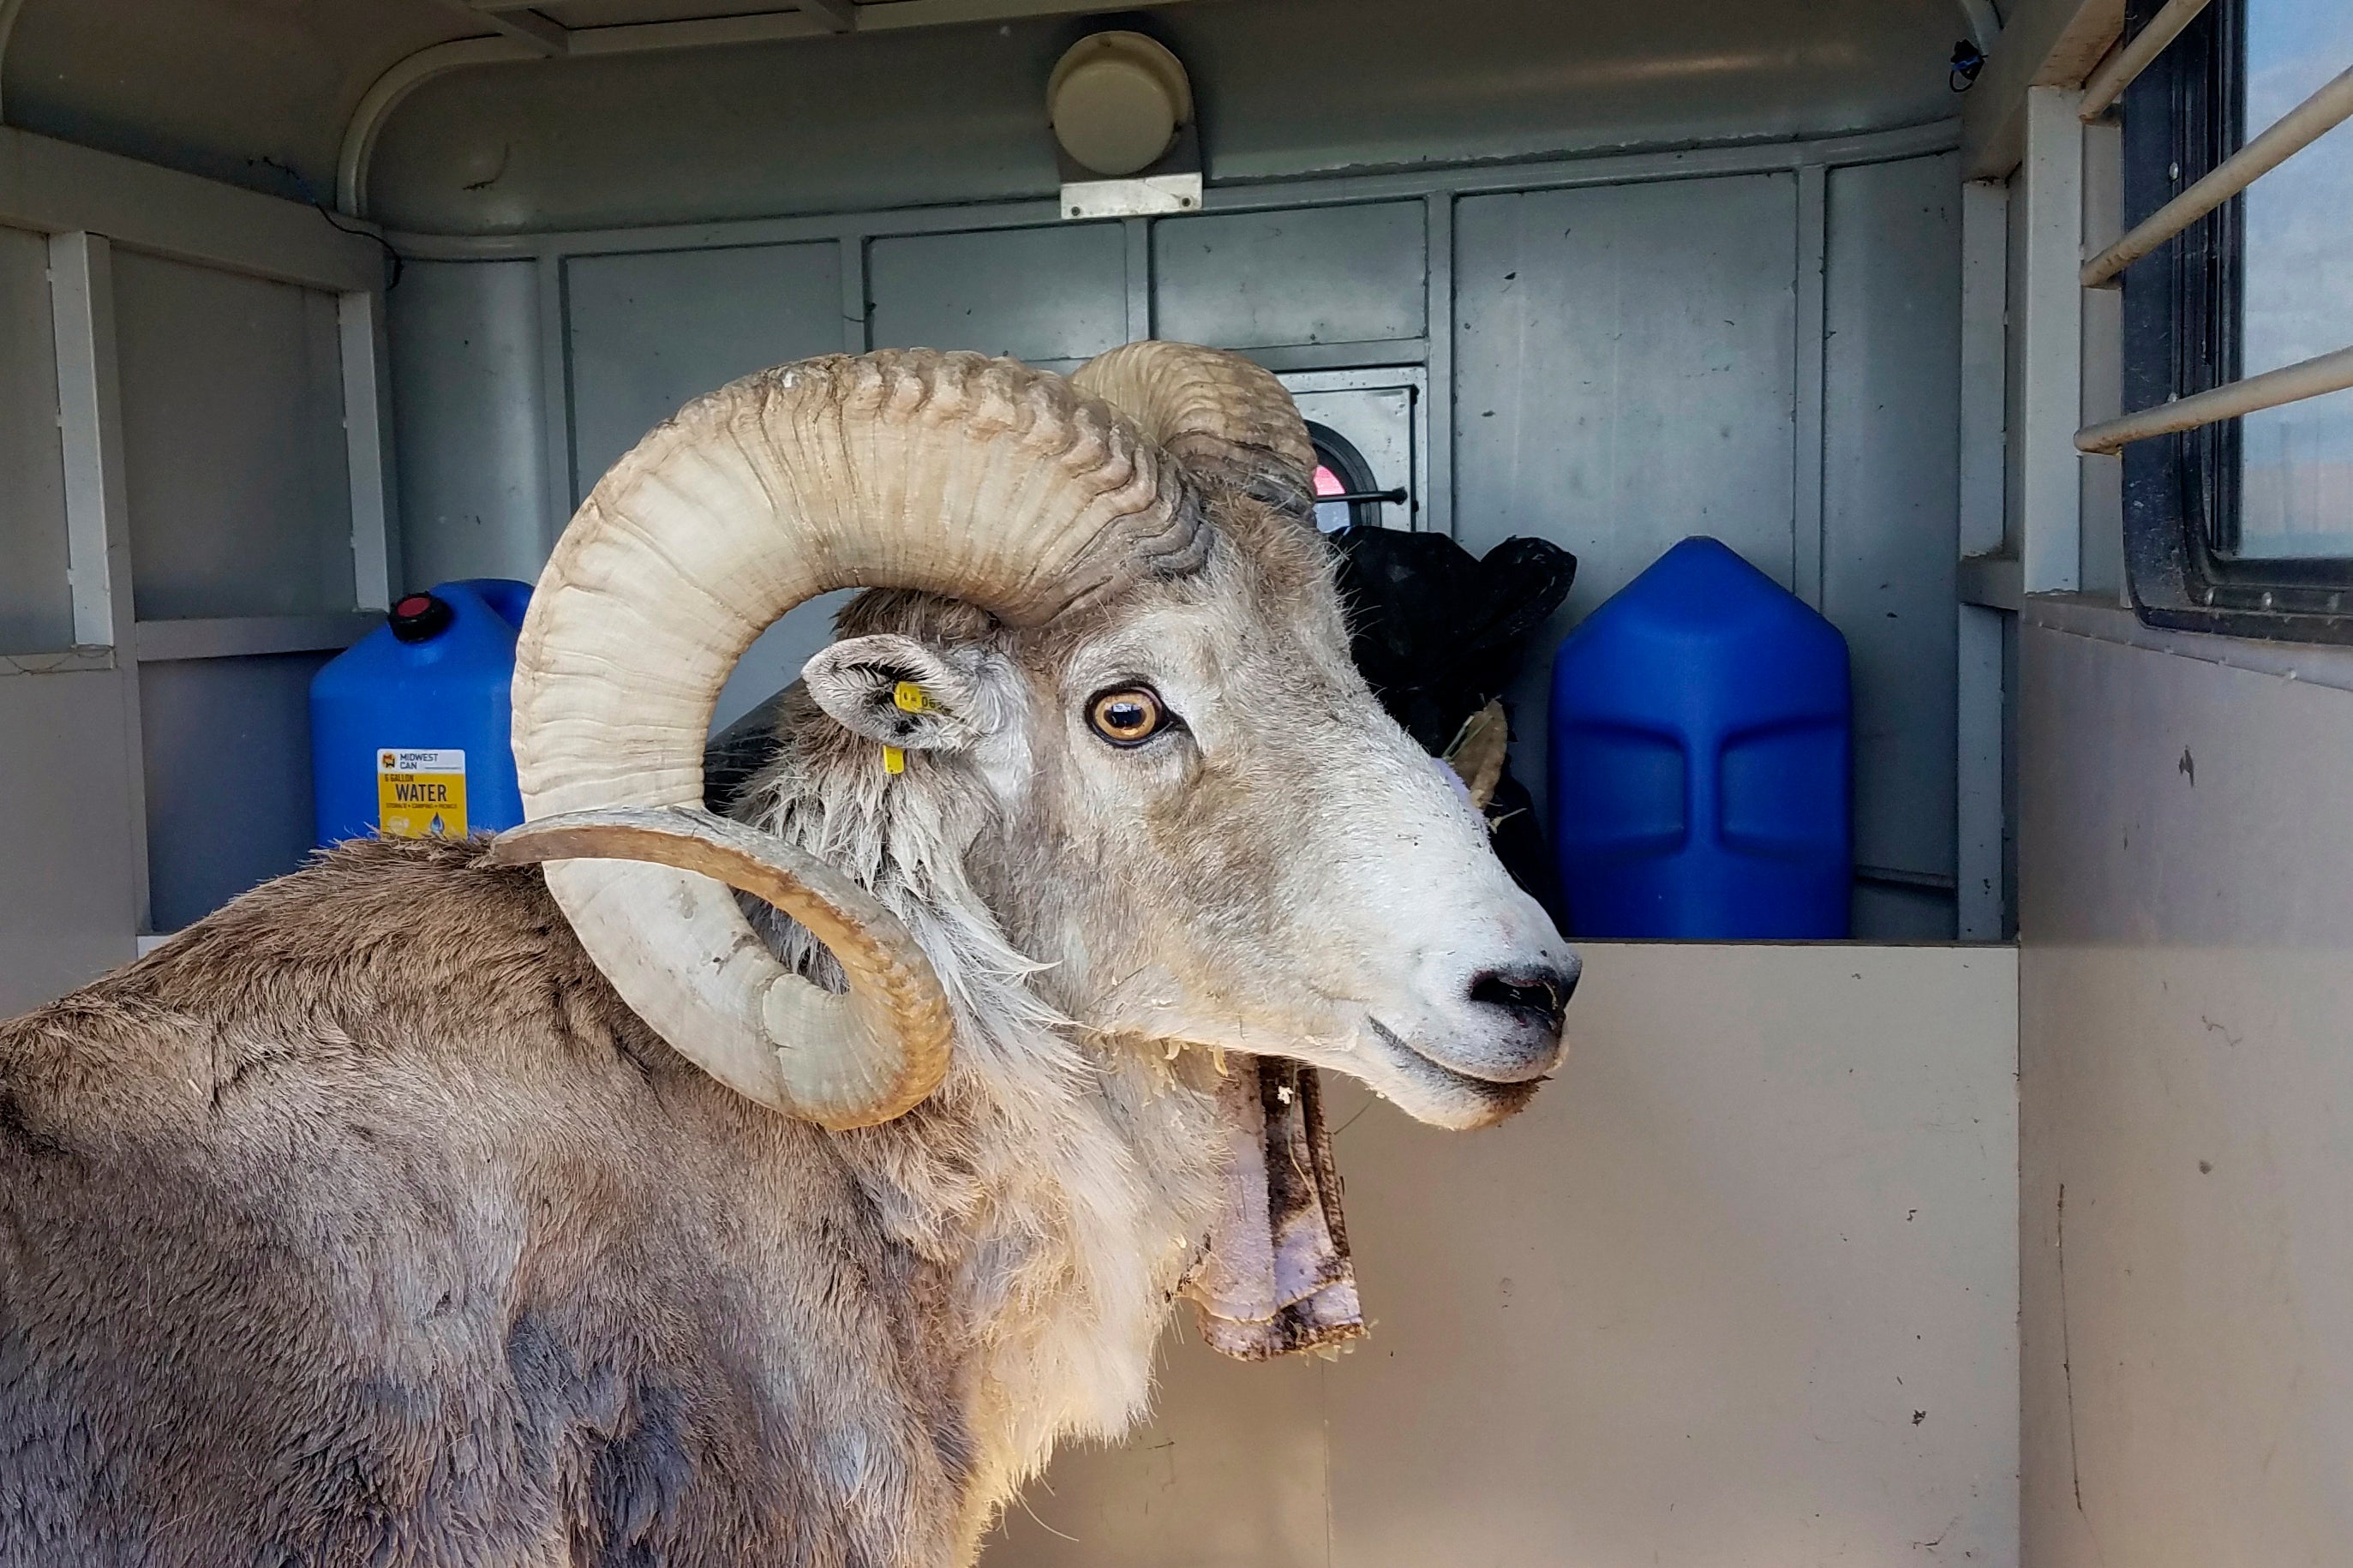 A sheep, nicknamed “Montana Mountain King” that was part of unlawful scheme to create large, hybrid species for hunters